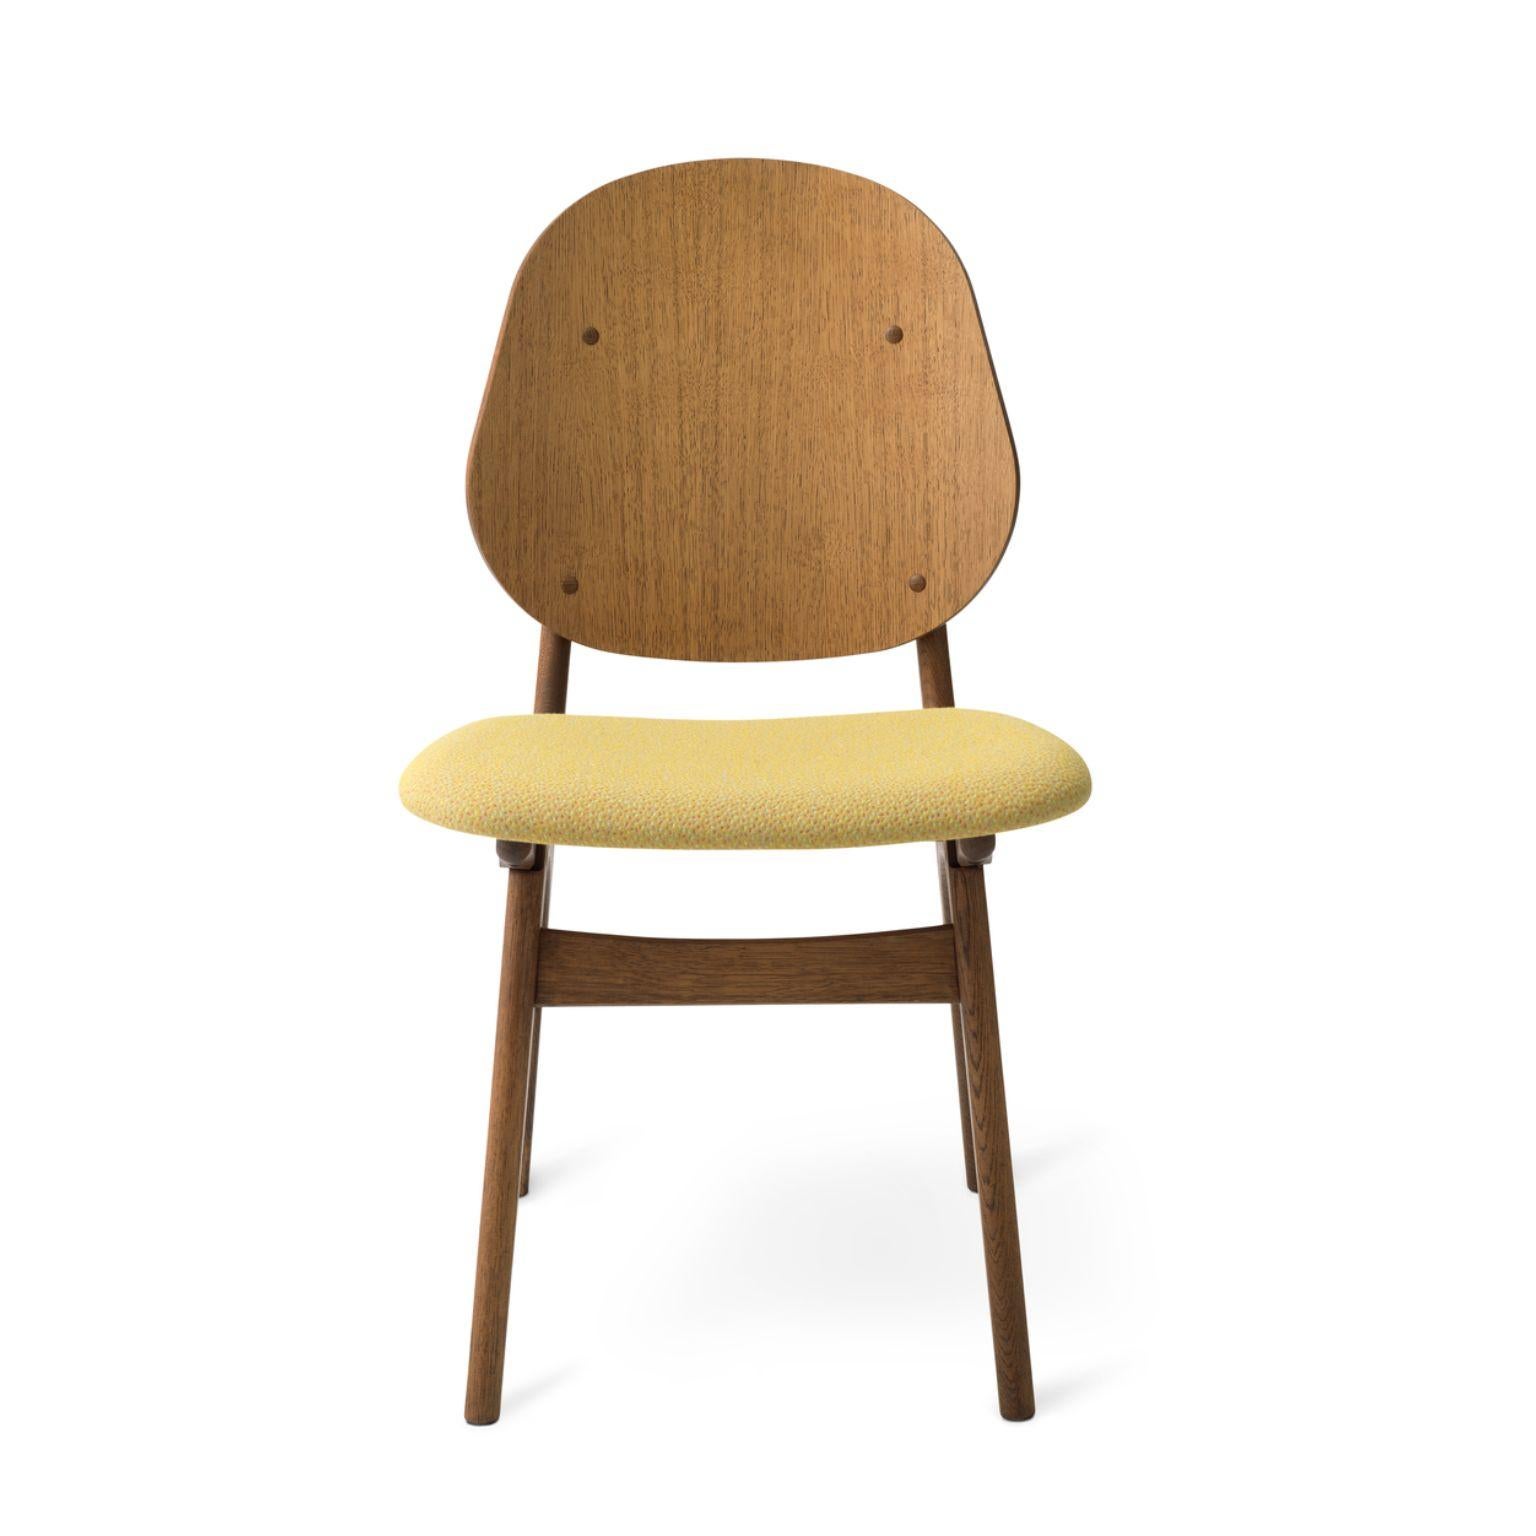 Noble chair Teak Oiled Oak Desert Yellow by Warm Nordic
Dimensions: D55 x W47 x H 85 cm
Material: Teak oiled solid oak, Veneer seat and back, Textile or leather upholstery.
Weight: 7.5 kg
Also available in different colors and finishes. 

An